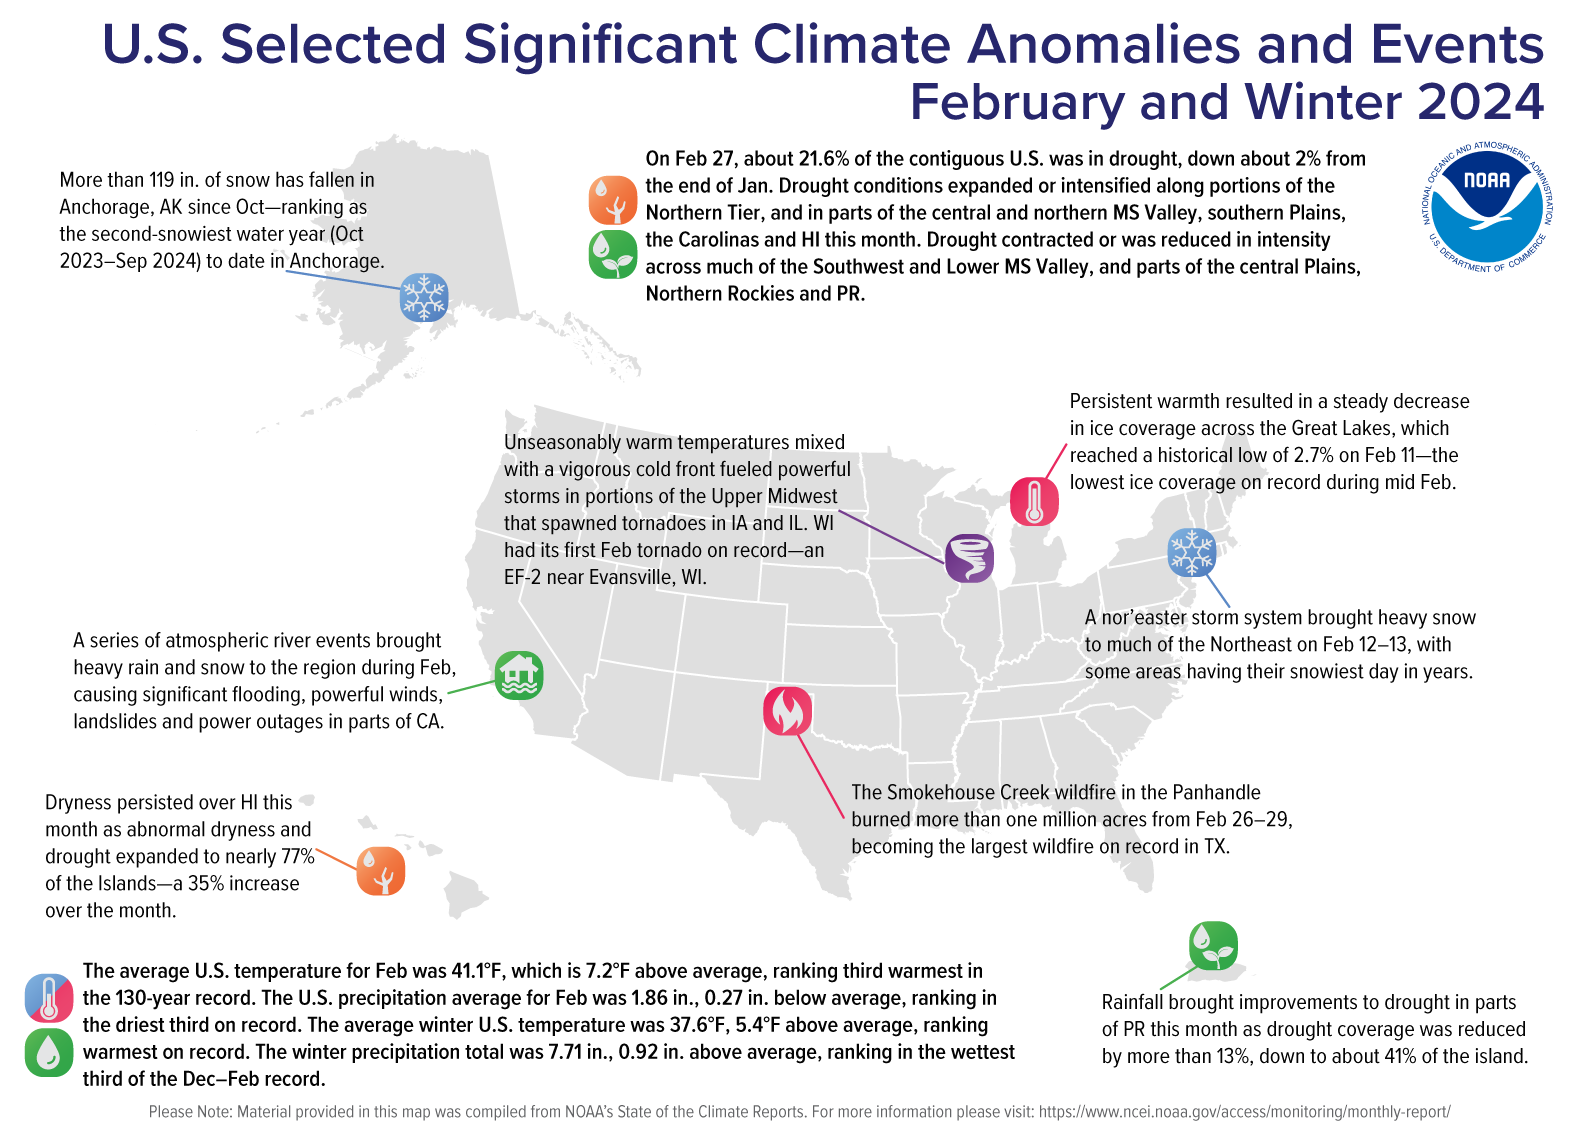 A map of the U.S. plotted with significant climate events that occurred during February 2024. Please see the story below as well as more details in the report summary from NOAA NCEI at http://bit.ly/USClimate202402.